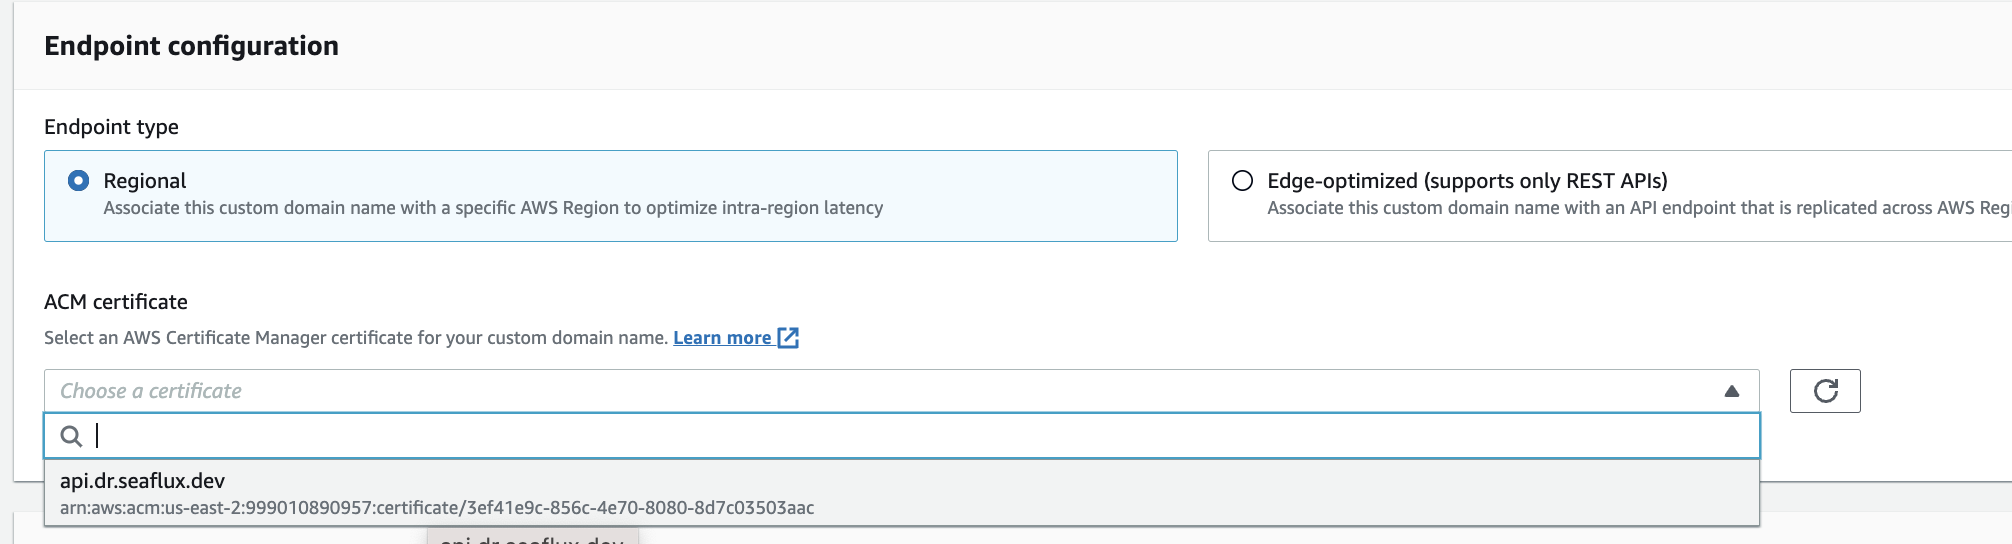 AWS API Gateway ACM Configuration: Choosing ACM (AWS Certificate Manager) from Endpoint Configuration and selecting a certificate for the custom domain